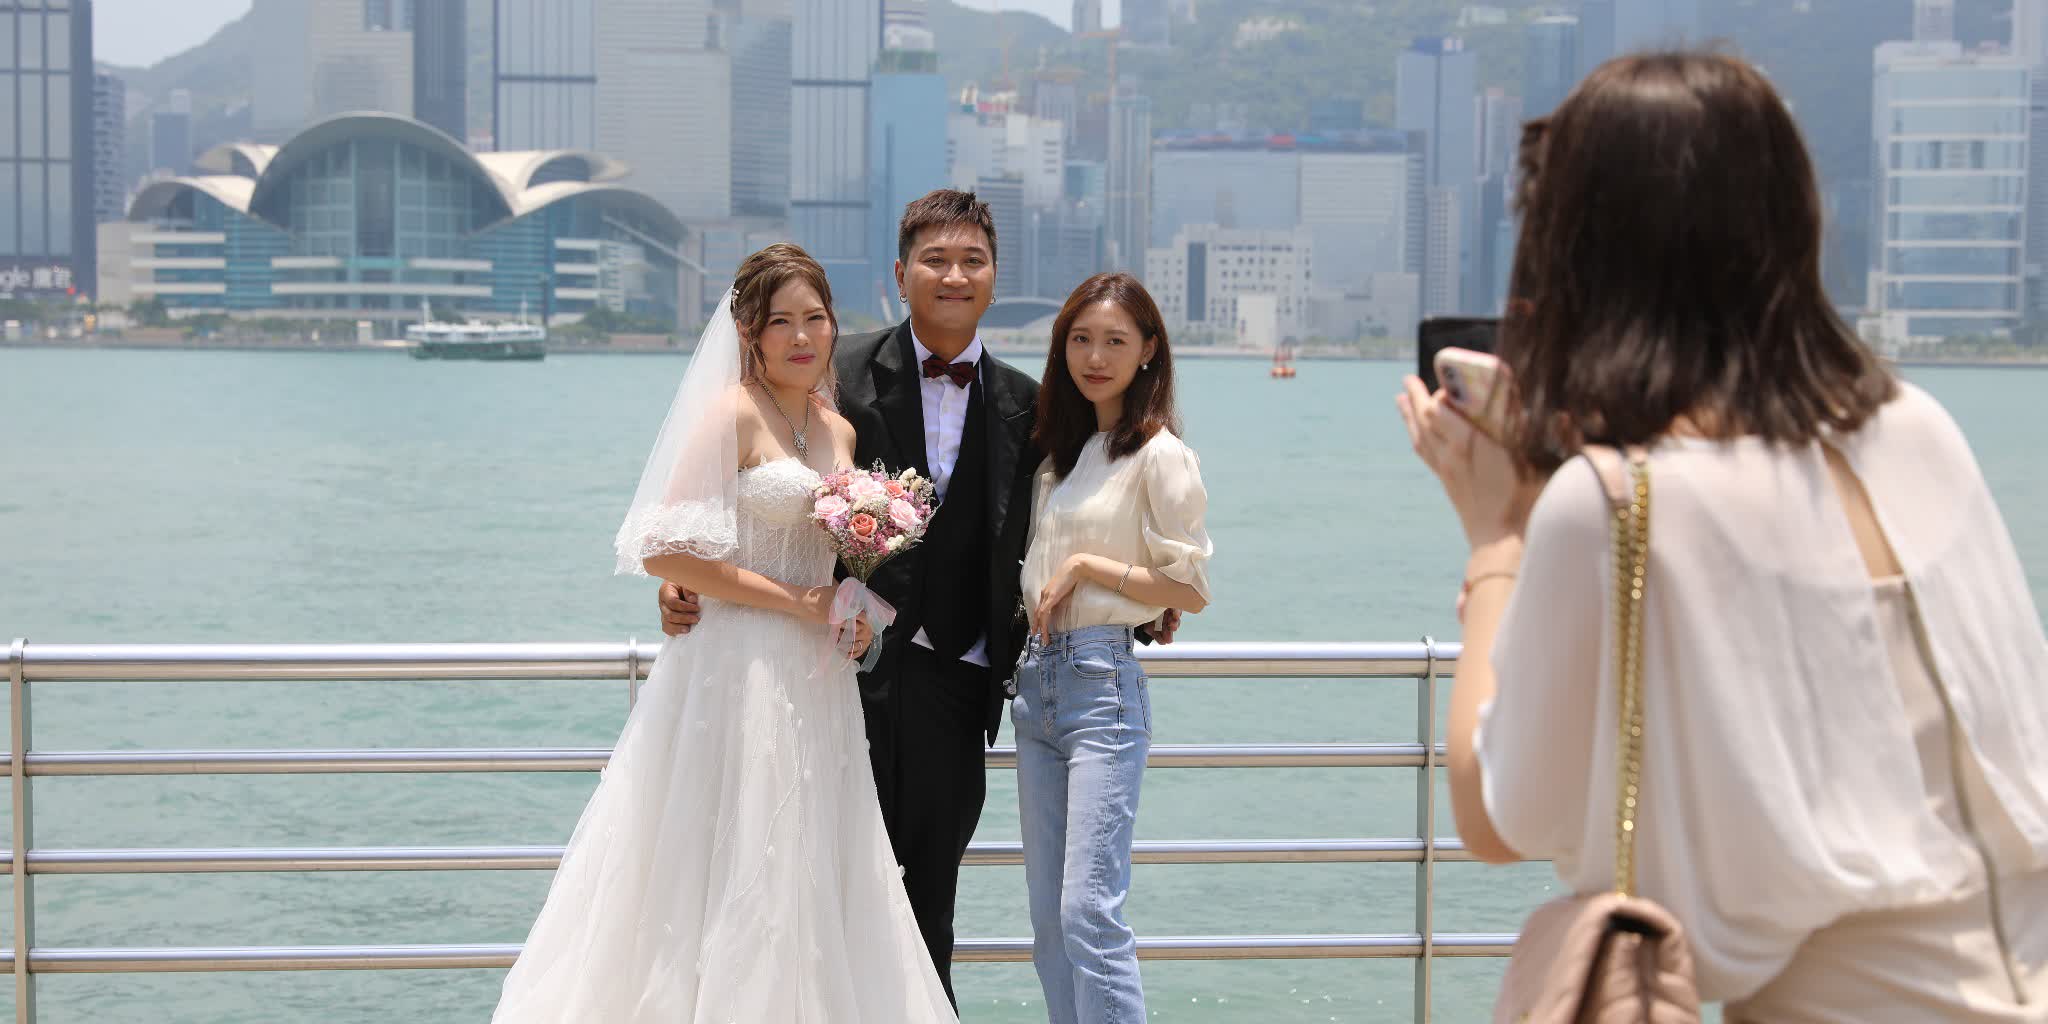 232 couples register for marriage on May 20 in HK, down 40% compared to last year